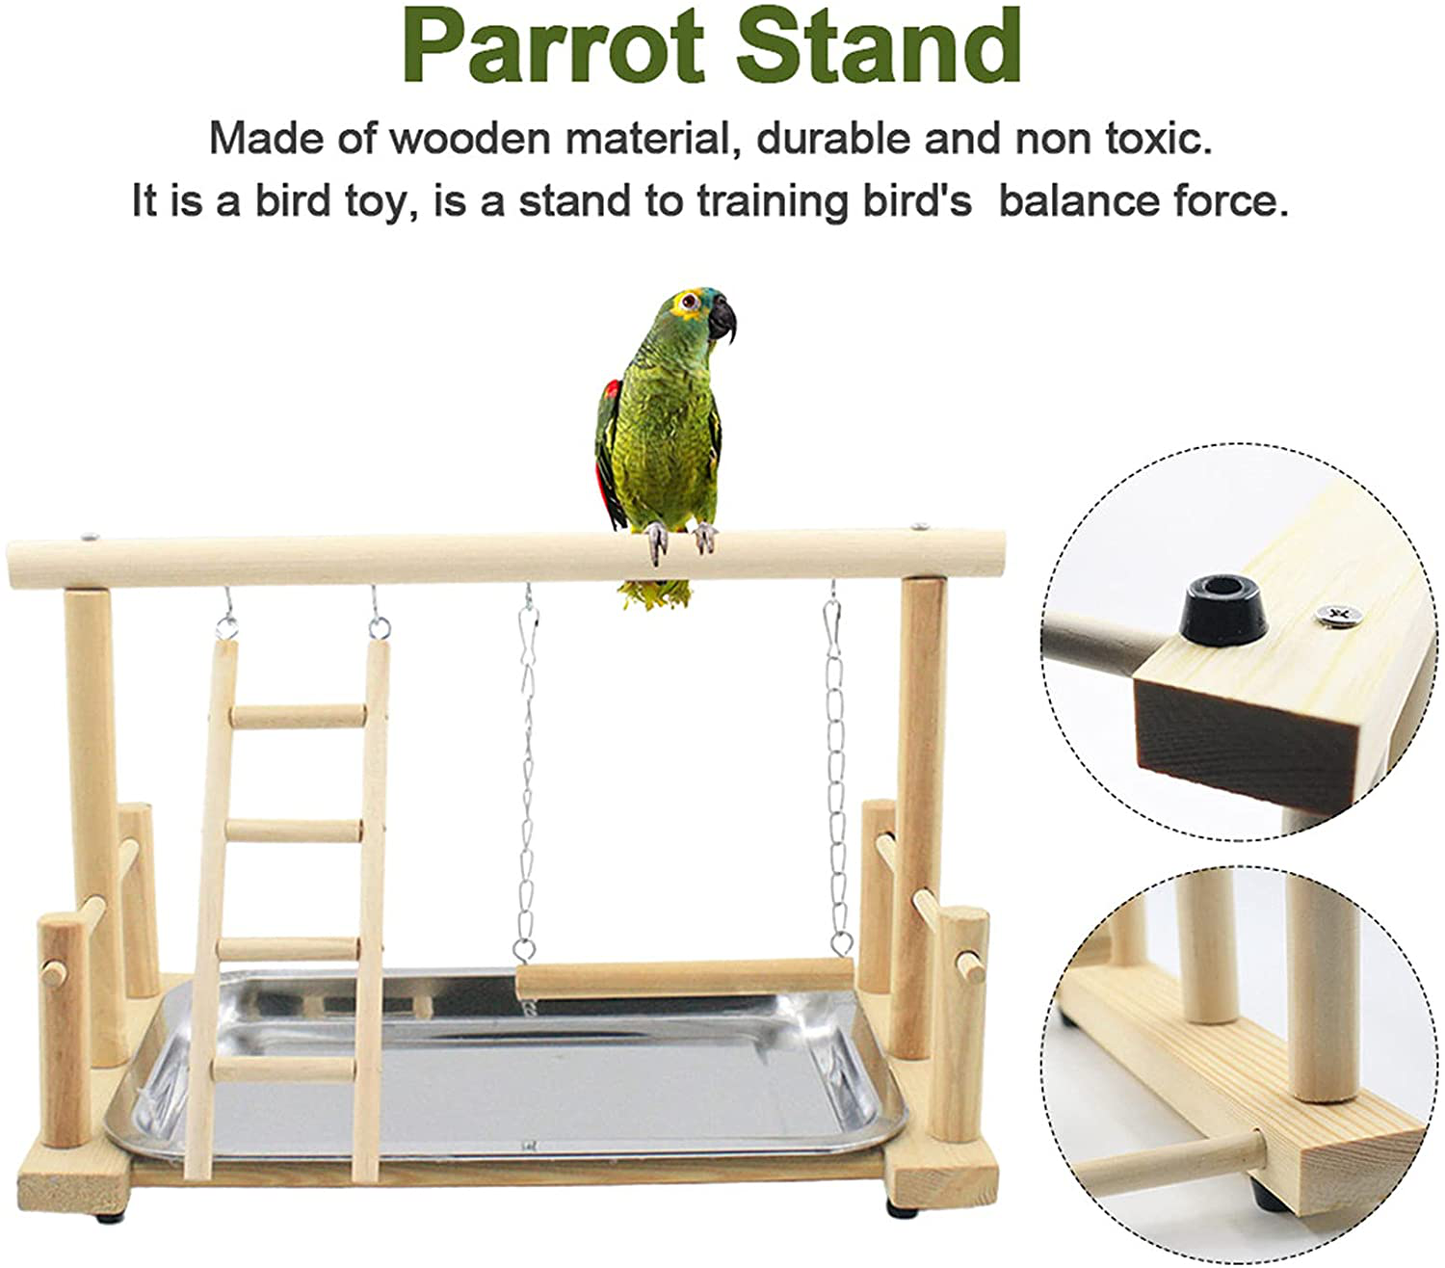 Fantasyday Bird Play Stand, Natural Wooden Bird Playground Birds Gym Bird Toy Accessories with Stainless Steel Feeding Stair Swing for Parrots, Finches # 1